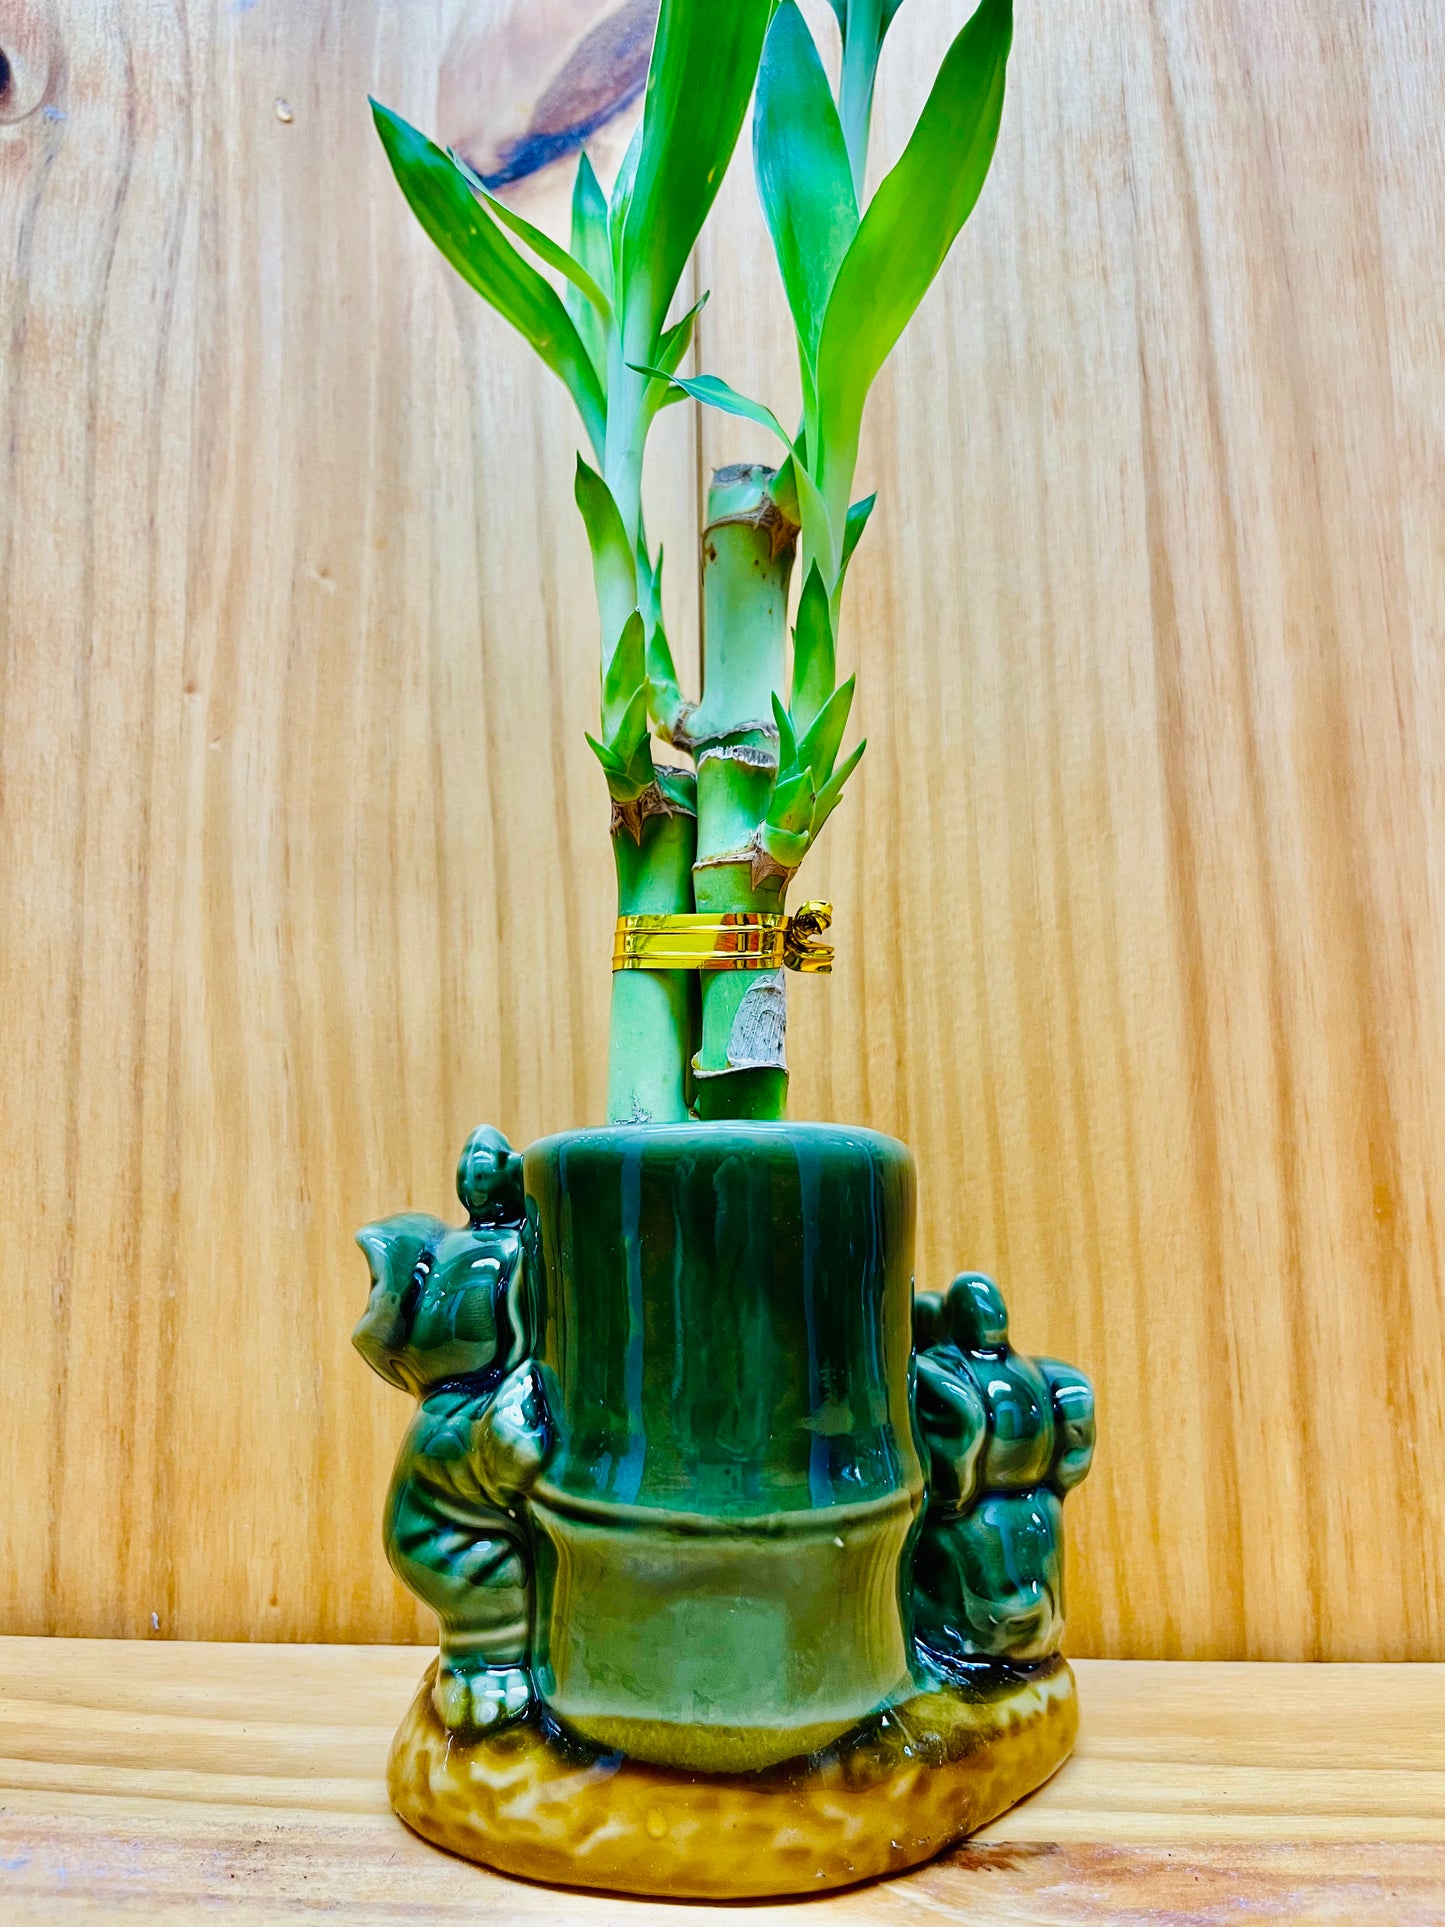 Lucky Bamboo in Ceramic Tall Elephant Vase 3 Stem 6”6”8” Bamboo includes River Pebble Rocks